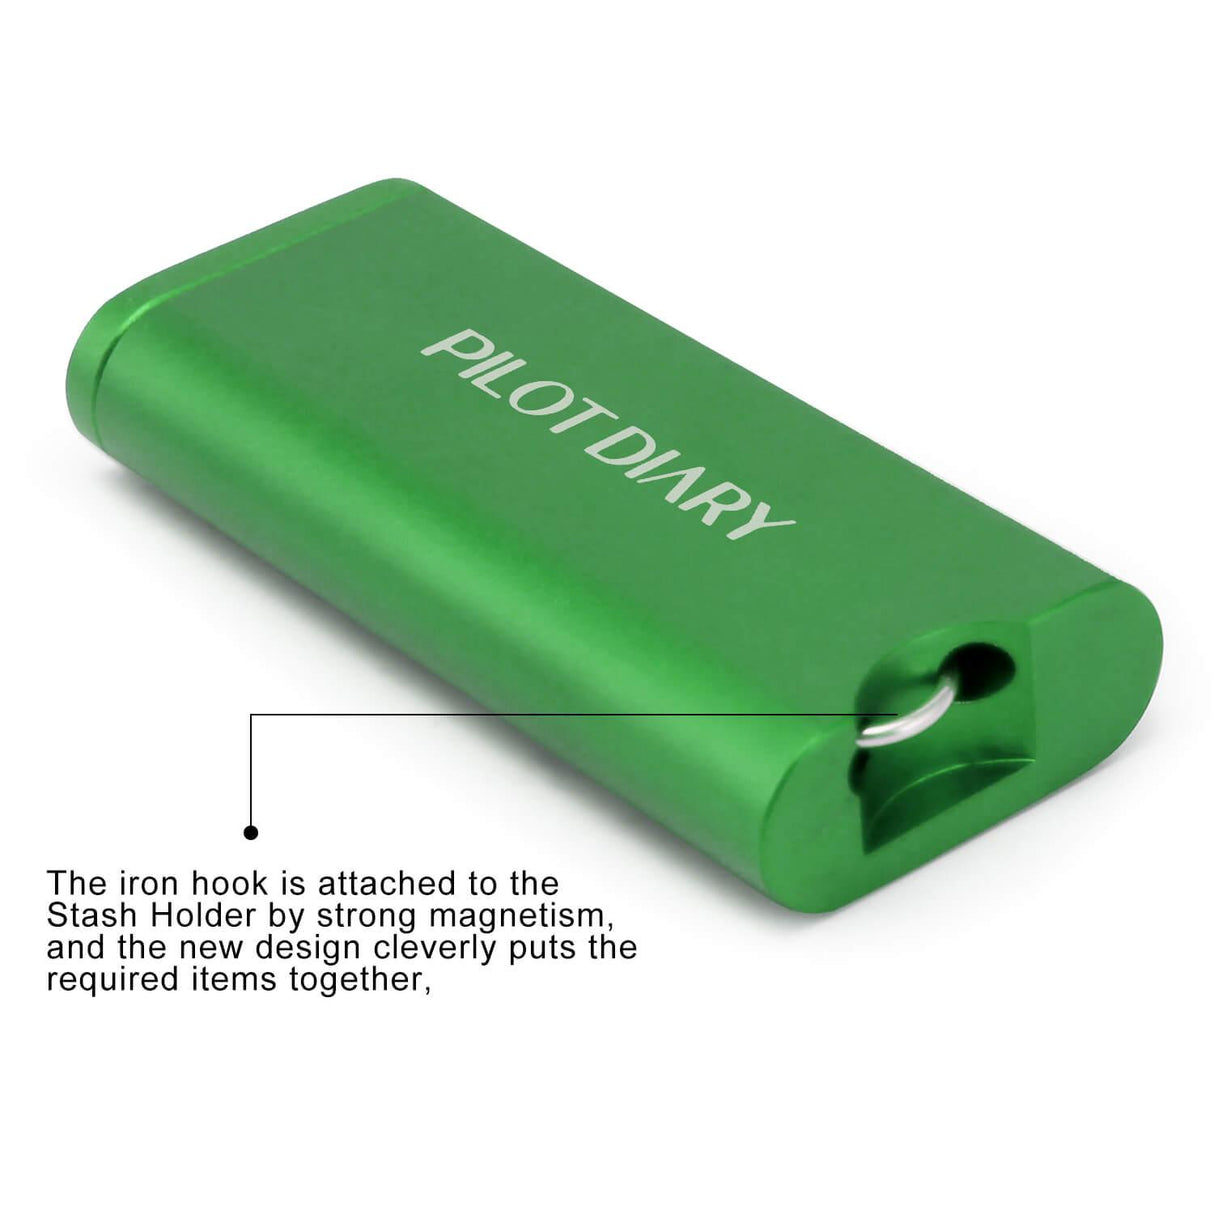 PILOT DIARY Metal Dugout One Hitter in Green - Angled View with Magnetic Closure